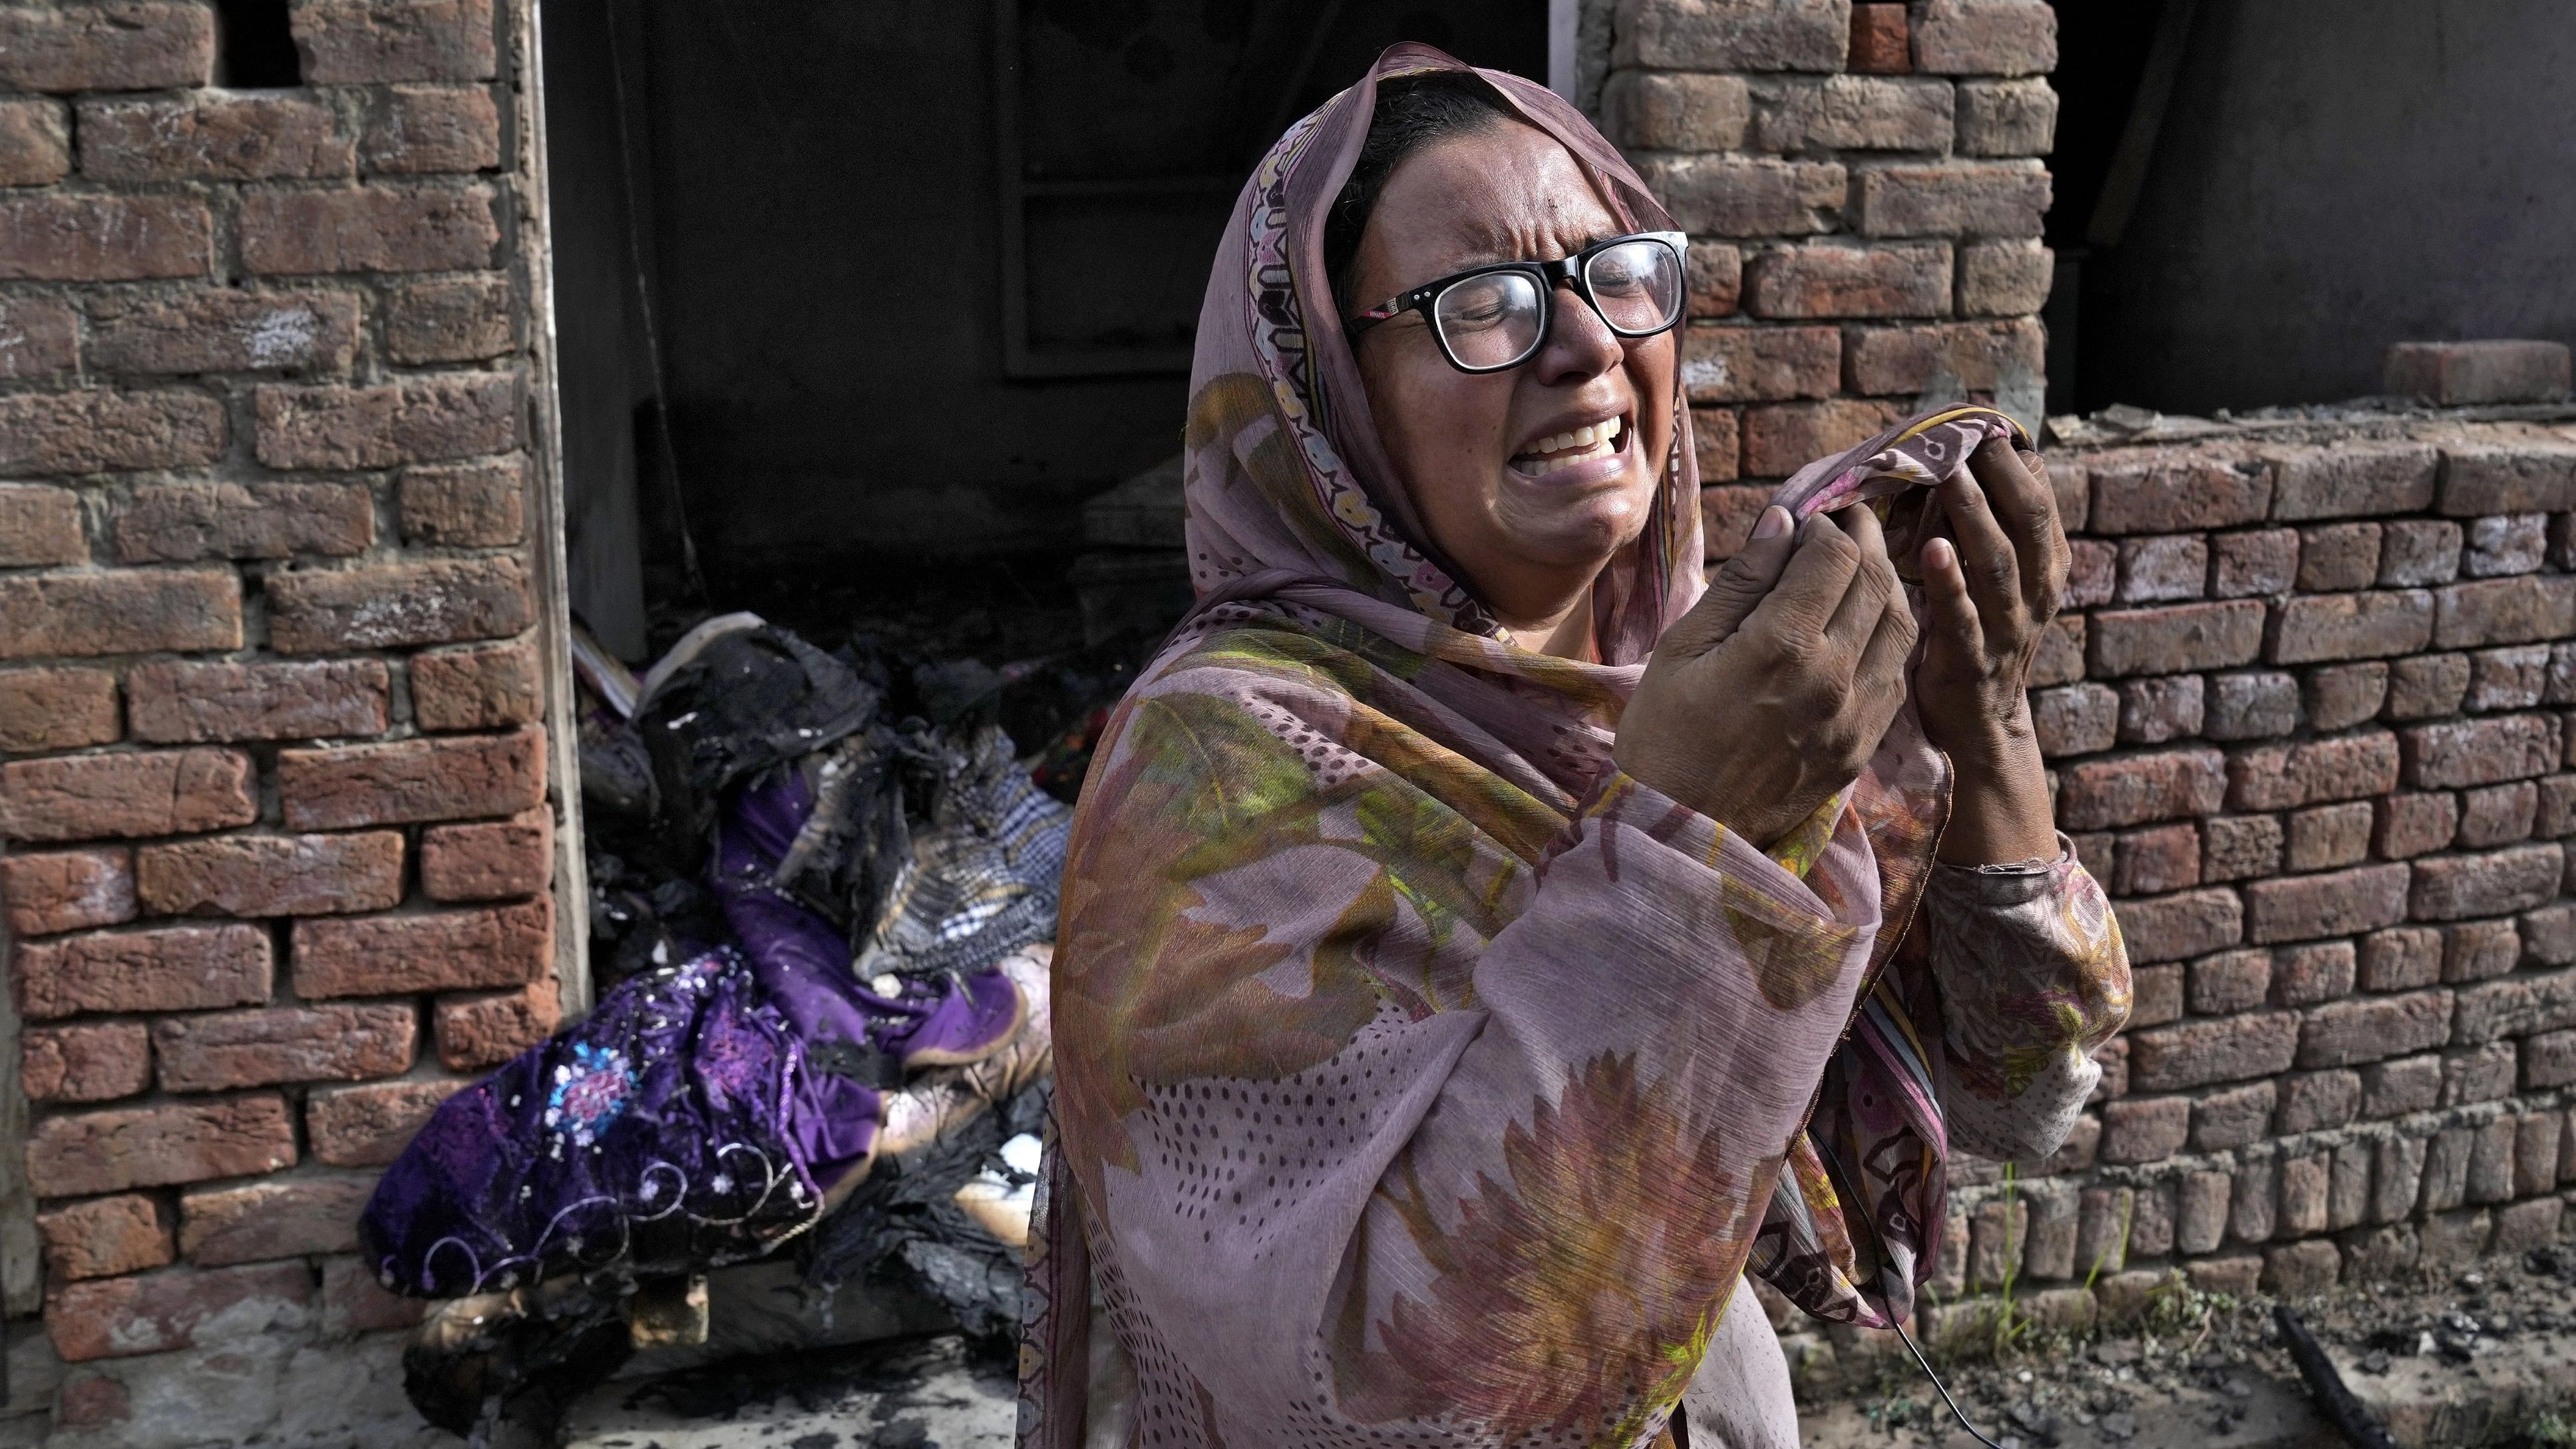 <div class="paragraphs"><p>A Christian woman weeps after looking at her home vandalized by an angry Muslim mob in Jaranwala in the Faisalabad district, Pakistan, Thursday, Aug. 17, 2023. Police arrested more than 100 Muslims in overnight raids from an area in eastern Pakistan where a Muslim mob angered over the alleged desecration of the Quran by a Christian man attacked churches and homes of minority Christians, prompting authorities to summon troops to restore order, officials said Thursday.</p></div>